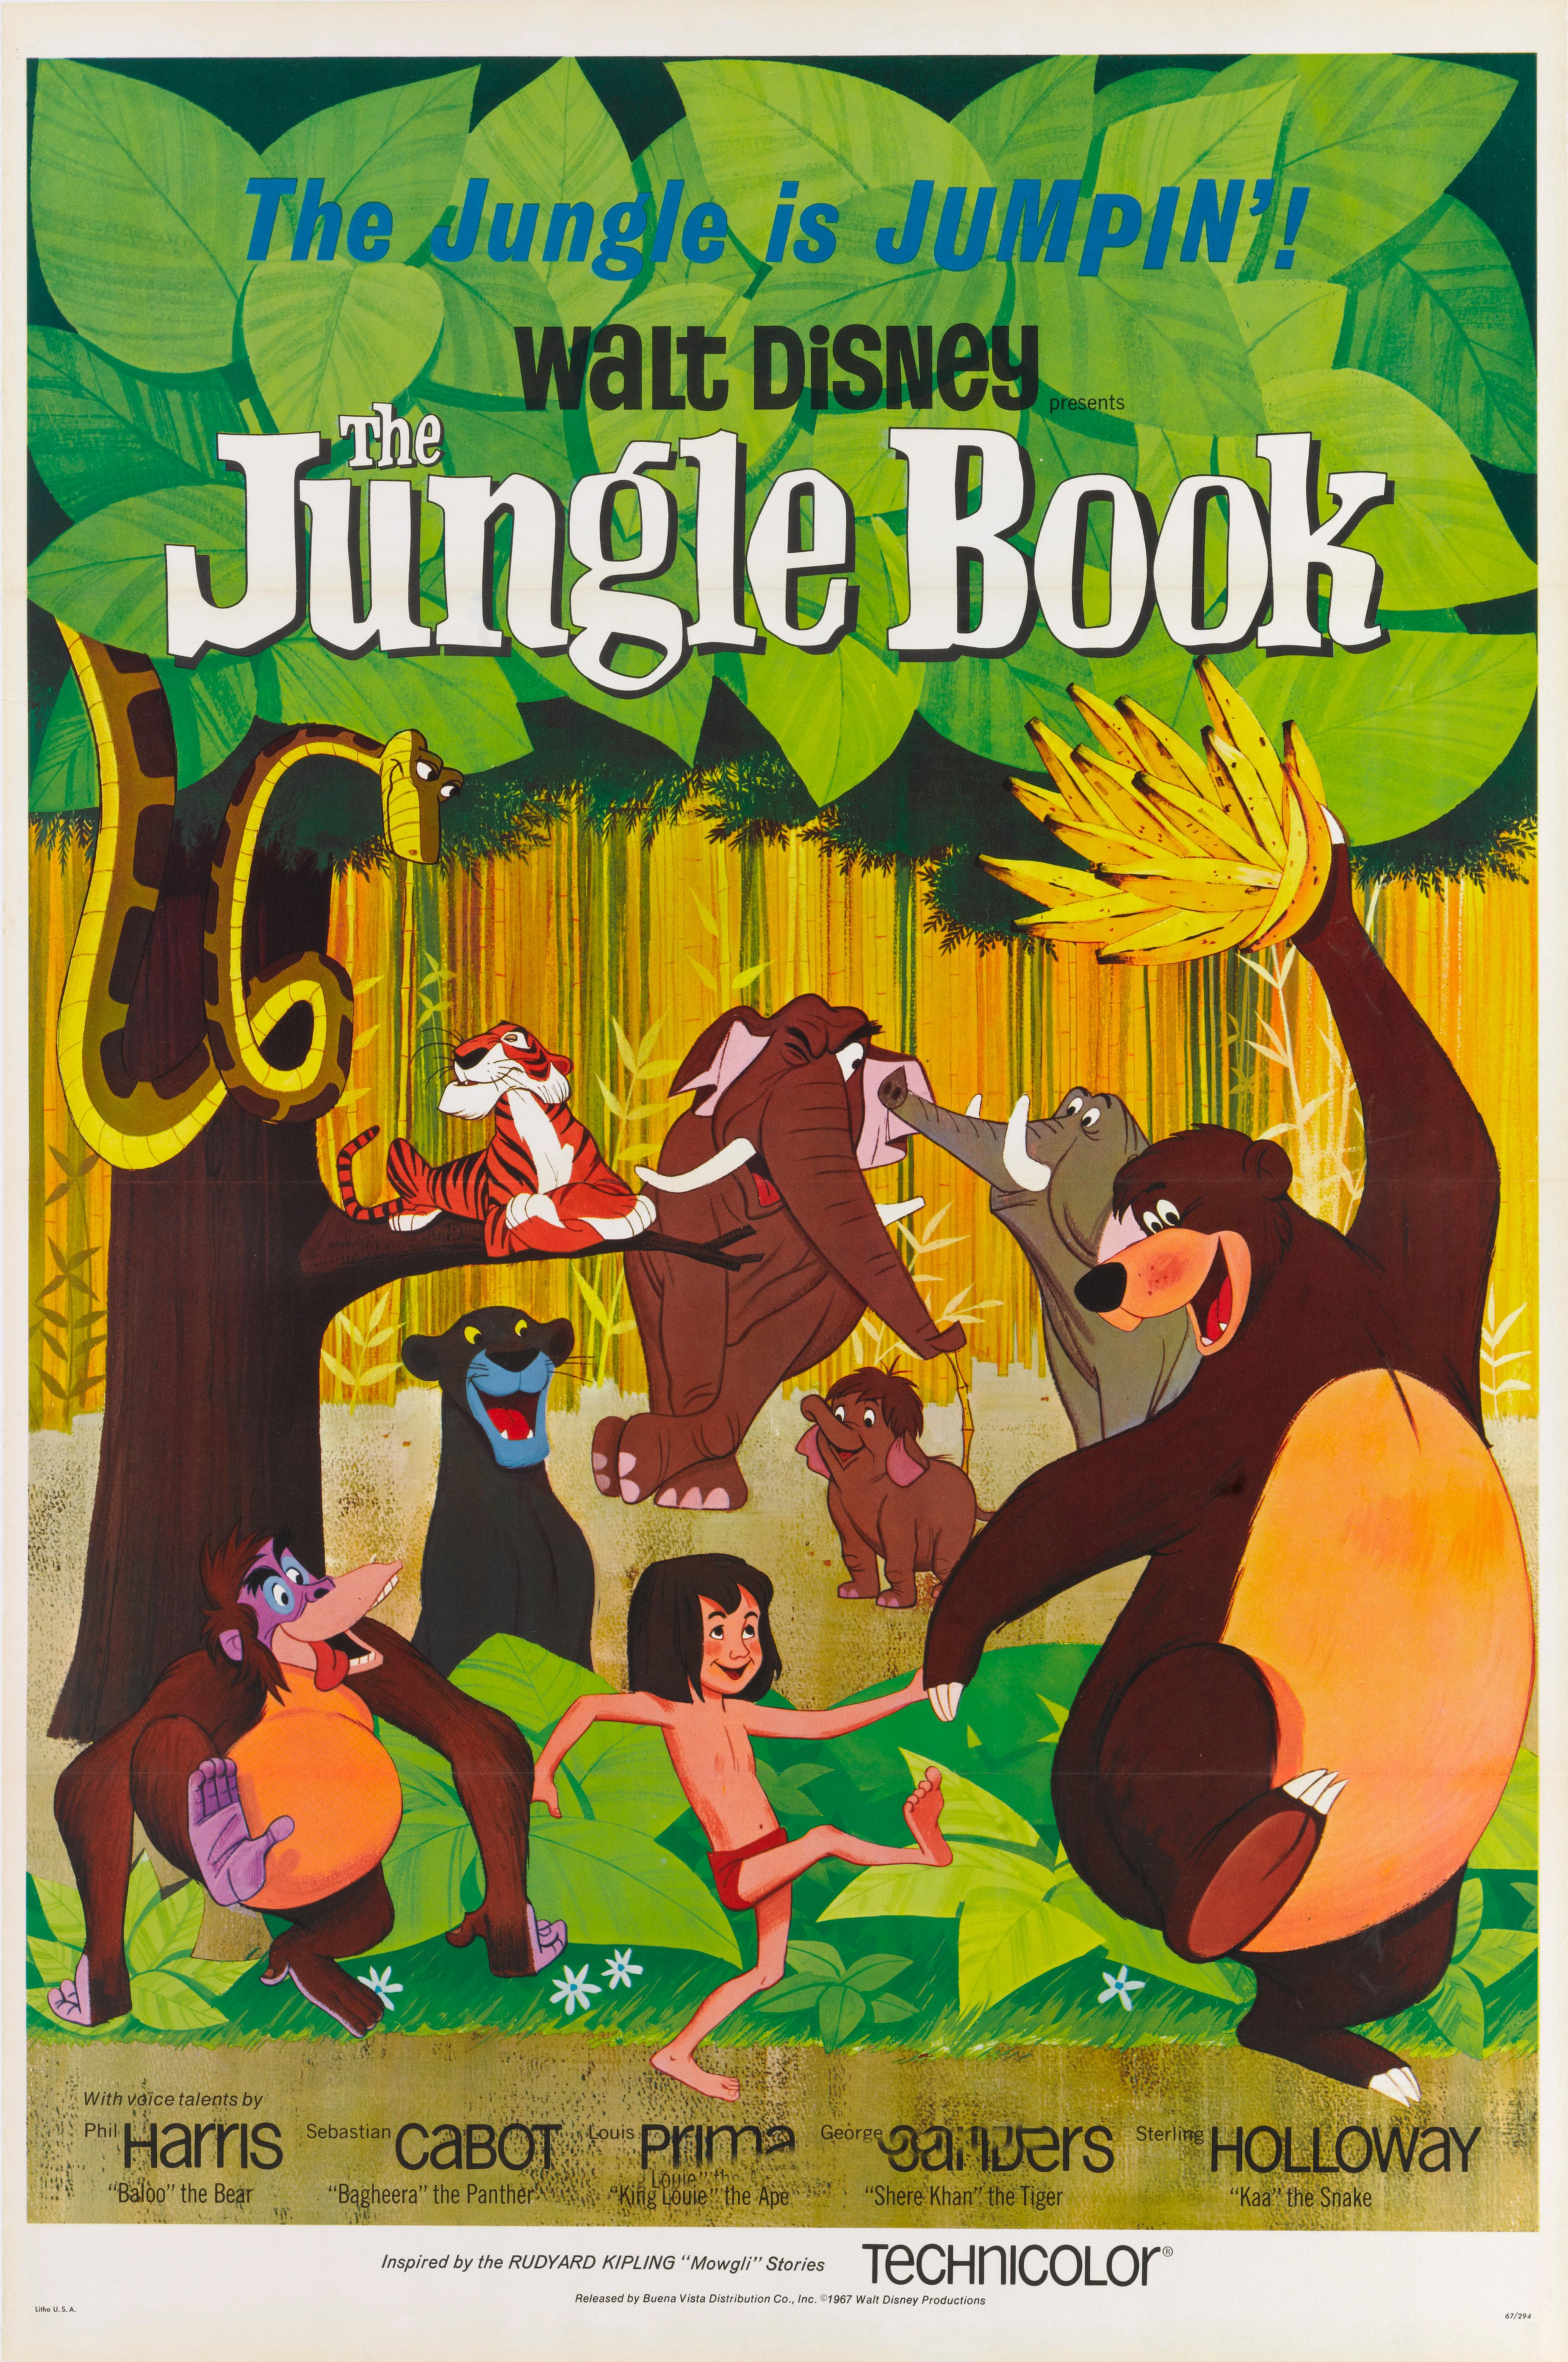 Original US film poster (41 x 27 in. (104 x 69 cm). 
This poster would have been used in American cinemas to advertise Disney's classic animation in 1967.
The film featured the famous song The Bare Necessities by Terry Gilkyson.
This poster has